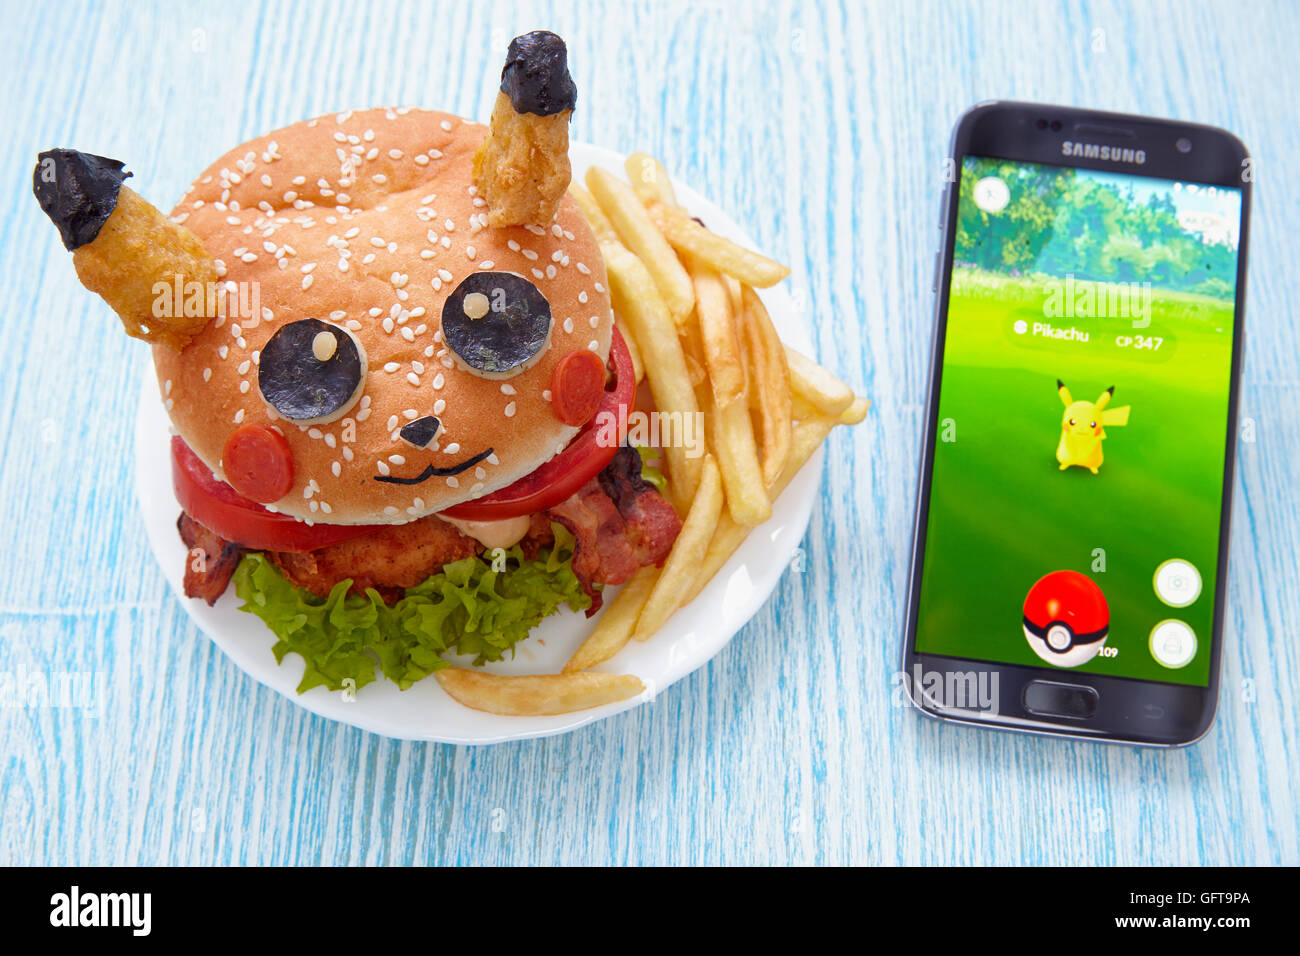 Moscow, Russia - July 29, 2016 Editorial image: Fan Art Pikachu Burger and Smartphone with Pokemon Go application. Selective foc Stock Photo